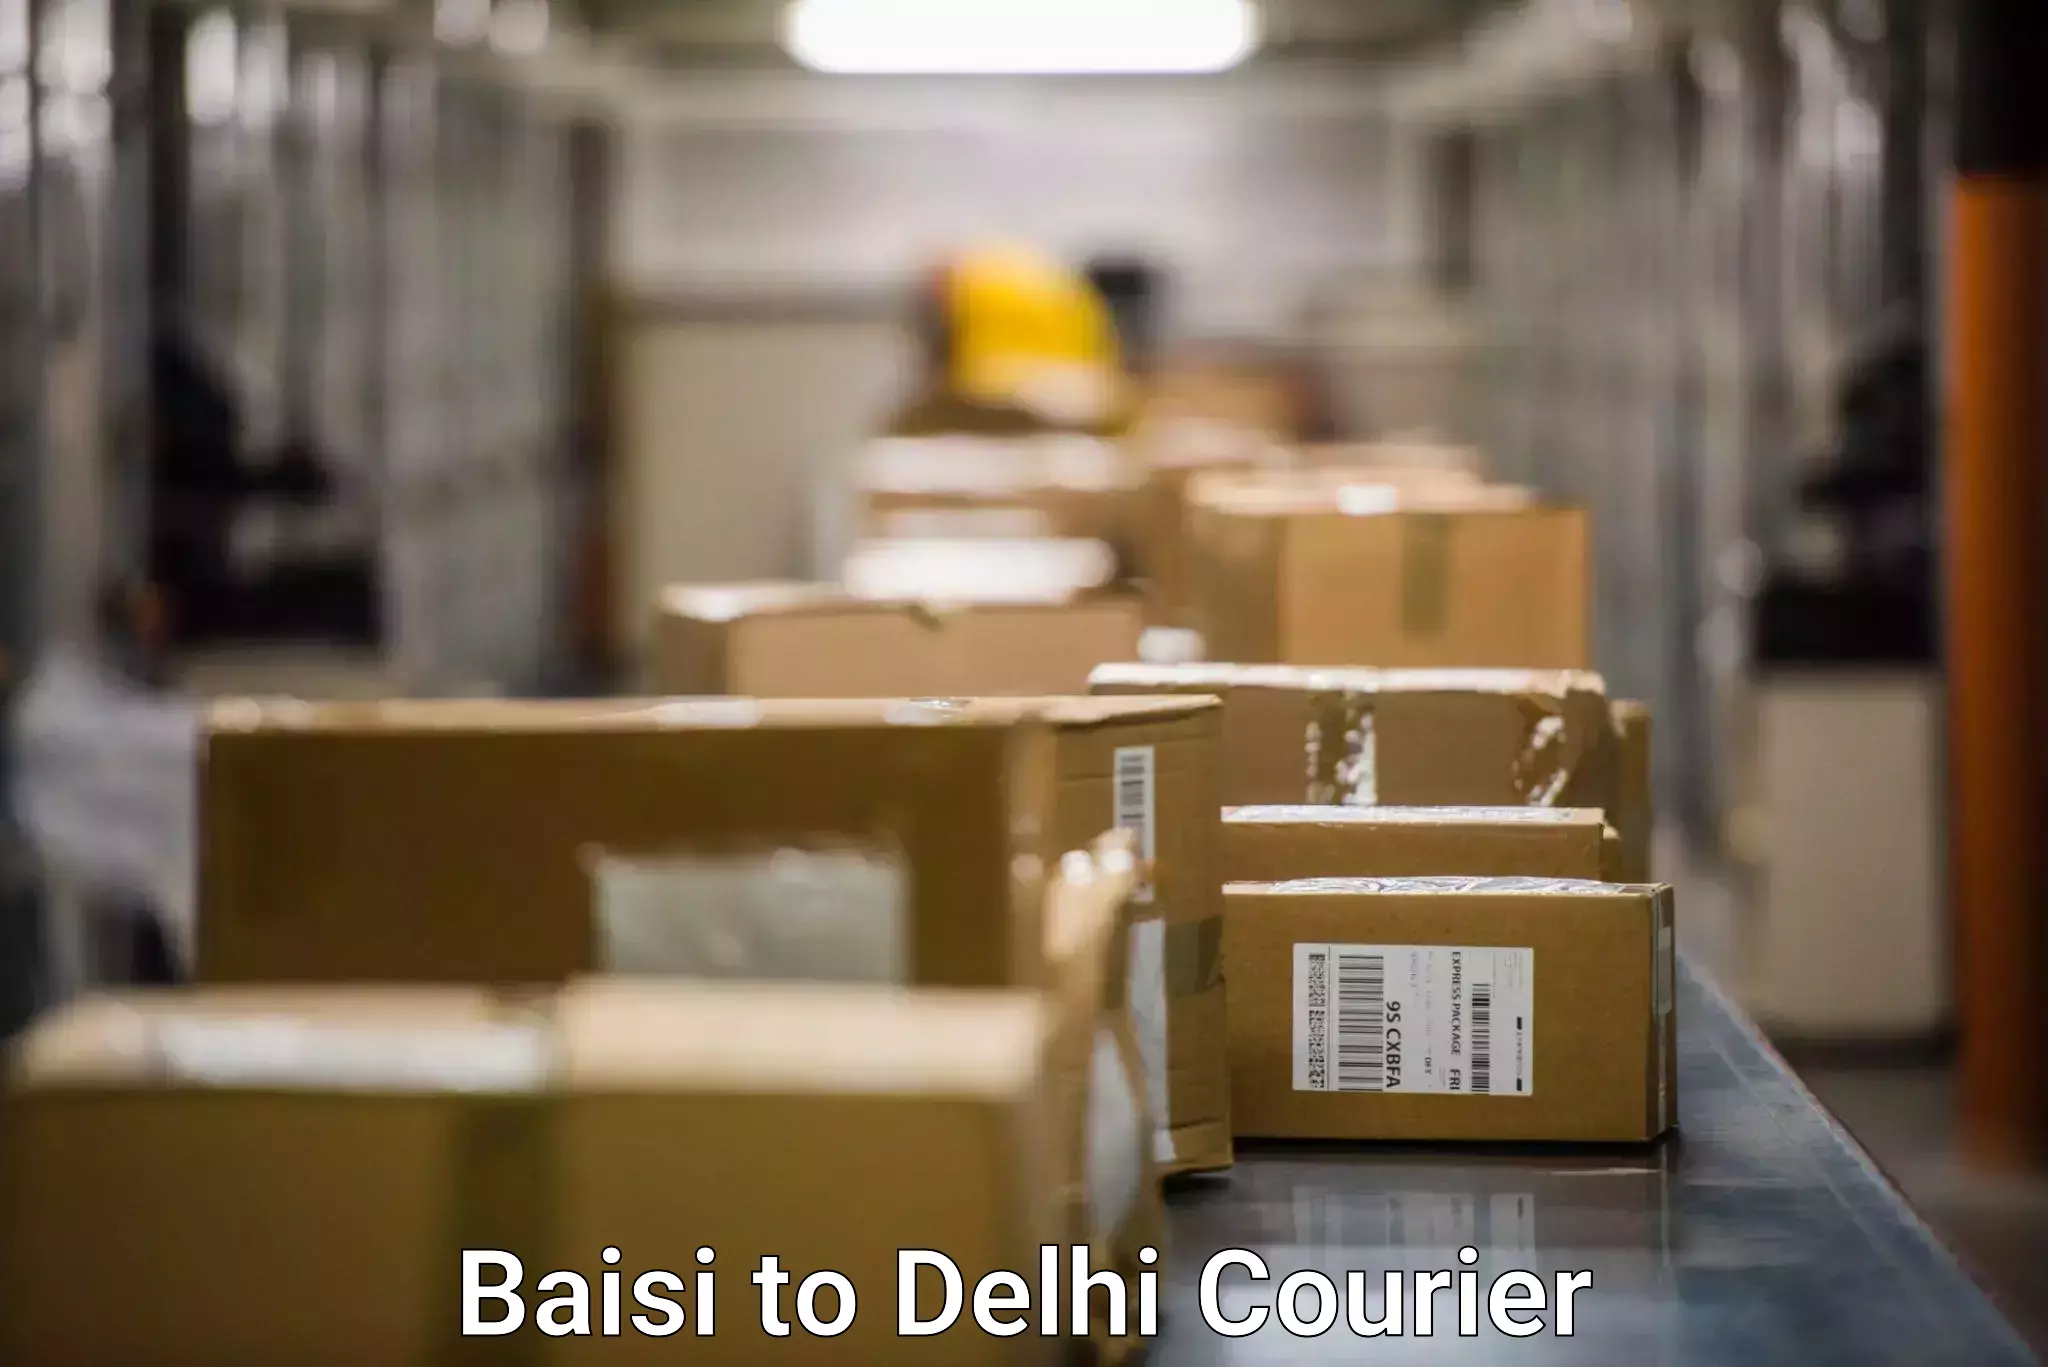 Express delivery network Baisi to Delhi